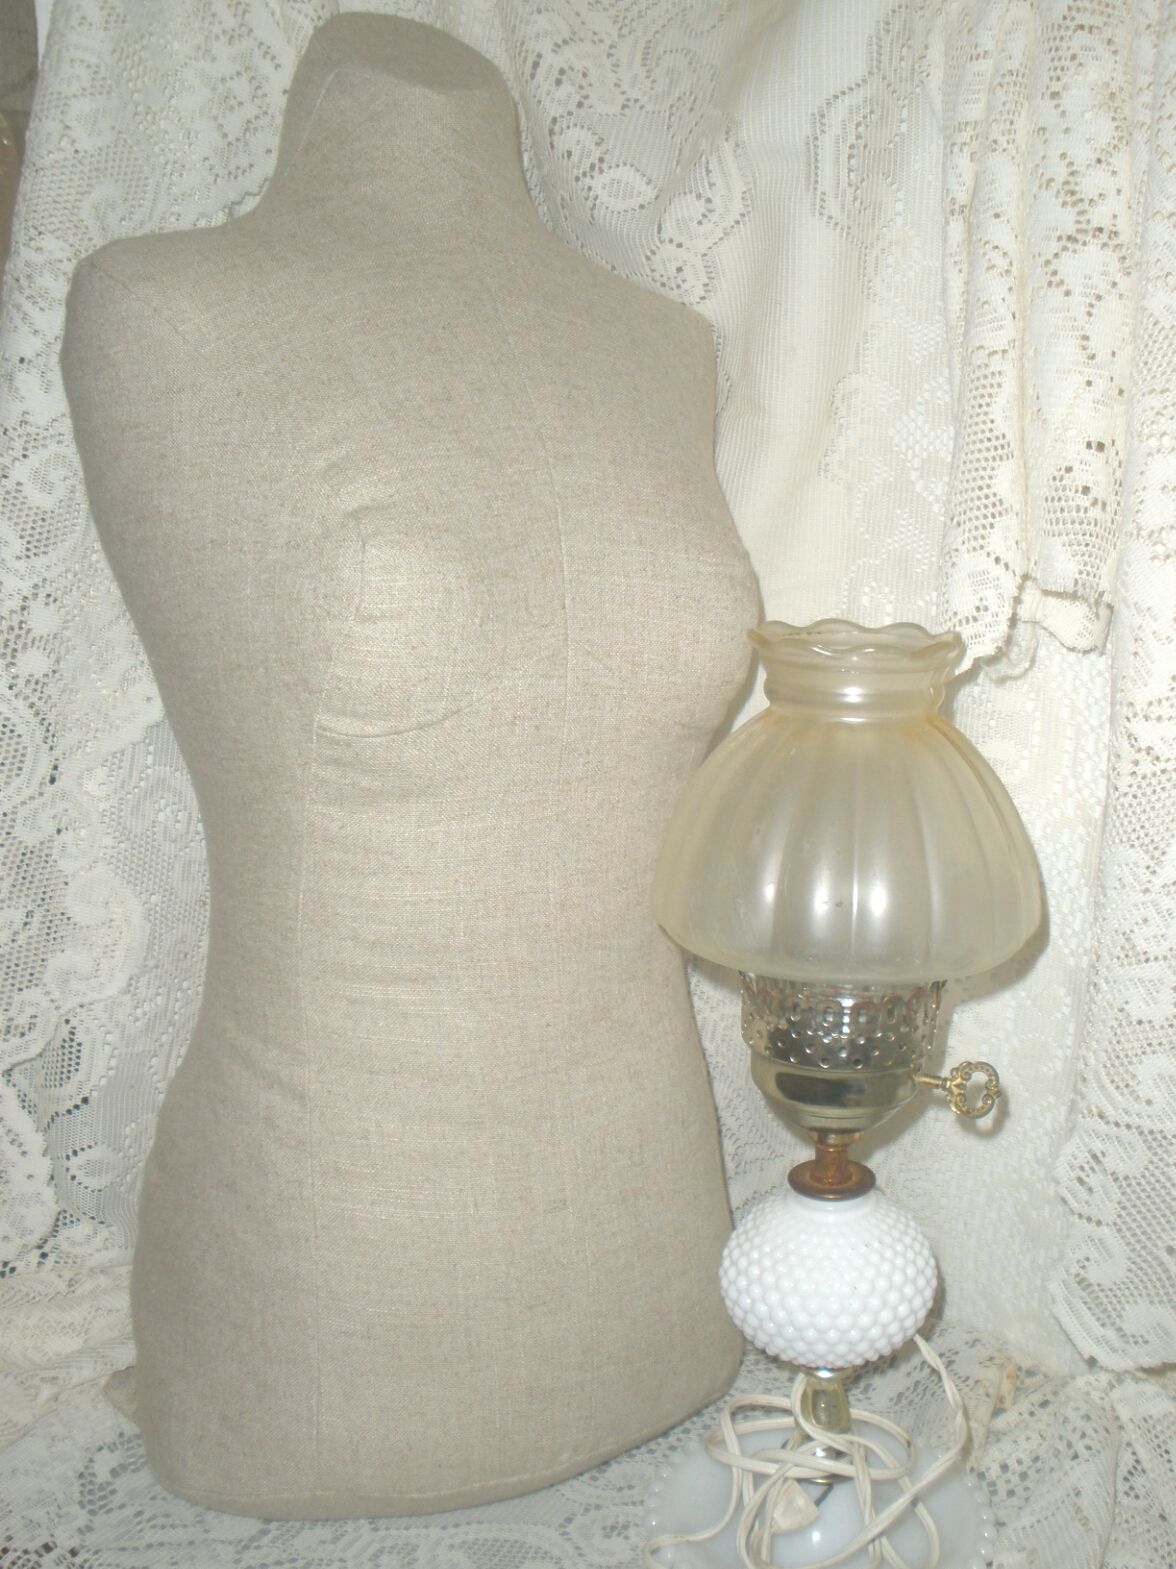 Boutique Dress Form Designs With Stand. Life Size Torso Great For Store Front Or Home Decor. Neutral Linen Fabric.